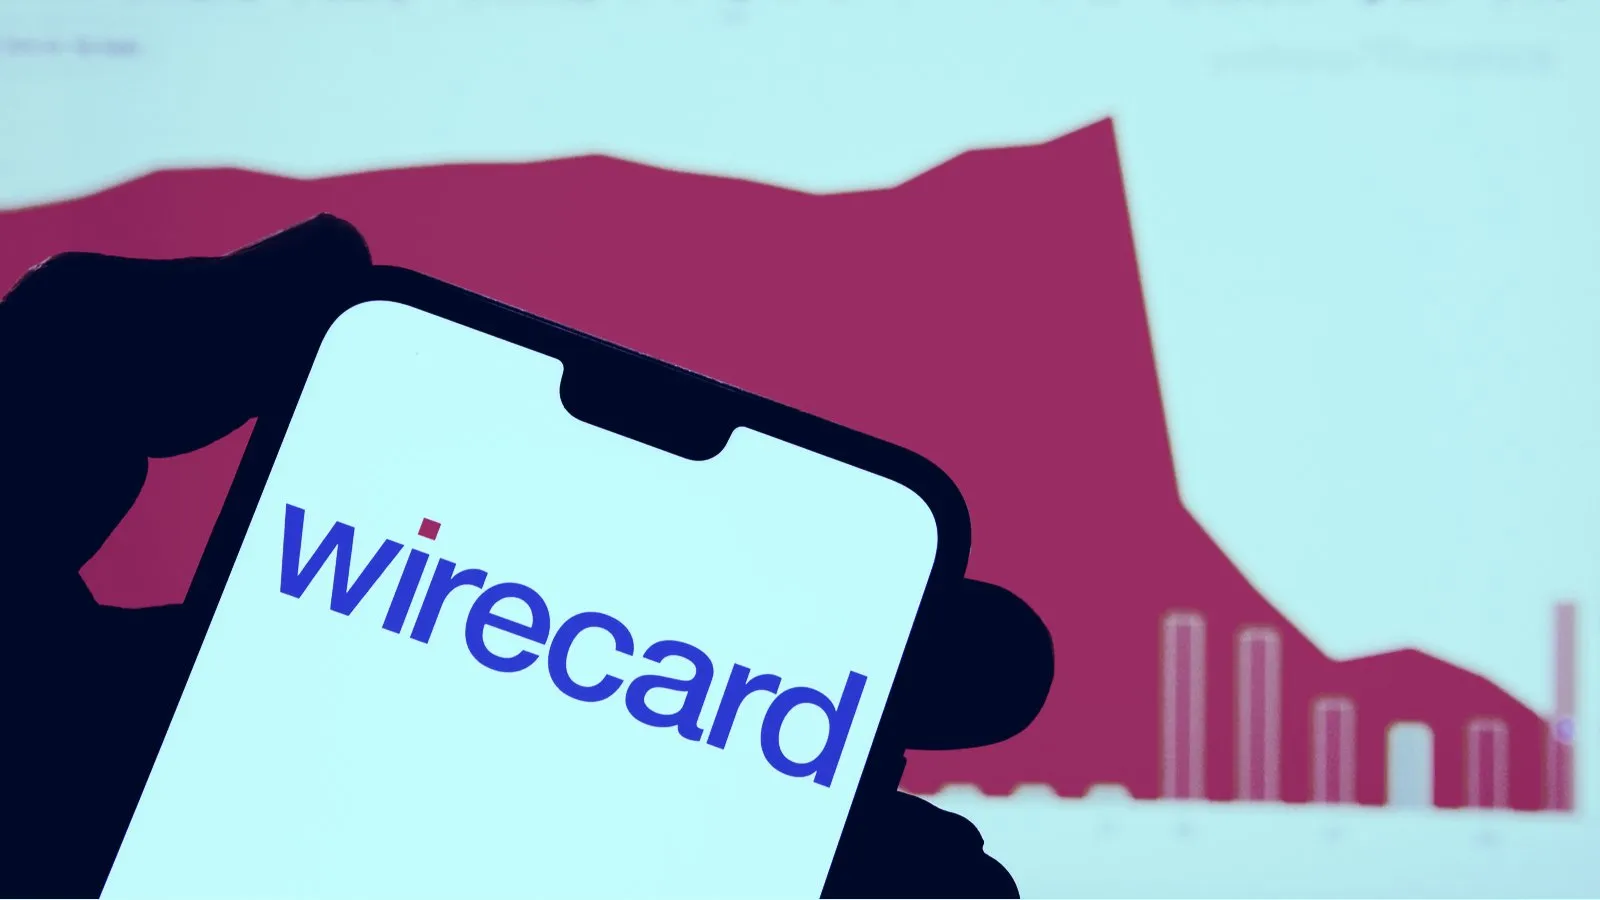 Former Wirecard COO Jan Marsalek reportedly fled to Russia—with a lot of Bitcoin. (Image: Shutterstock)